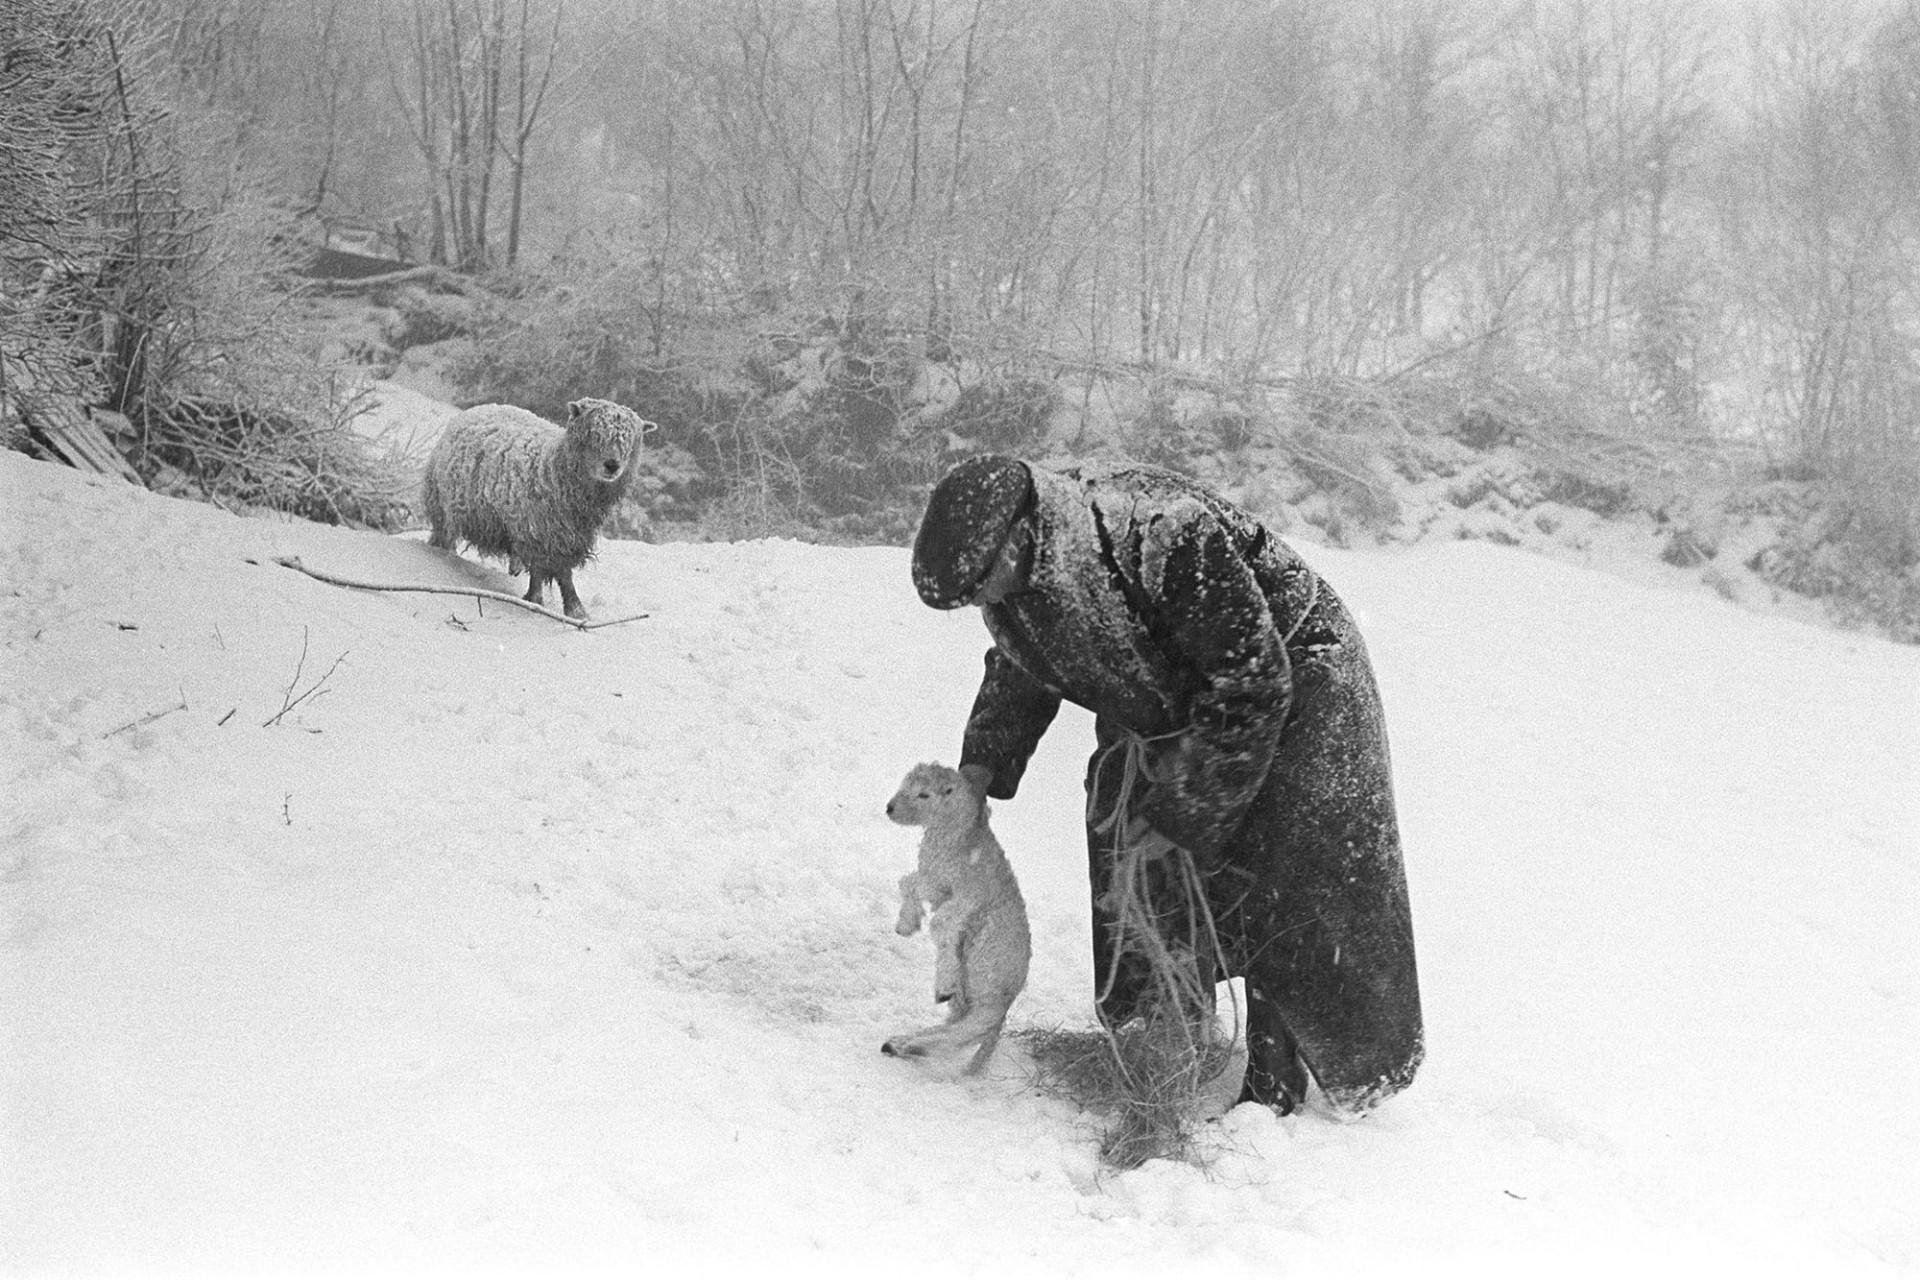 Snow, rescuing lamb in blizzard. 
[Ivor Brock rescuing a lamb in a snow blizzard at Millhams, Dolton. A sheep covered in snow is looking on. Trees and hedges covered in snow are visible in the background.]